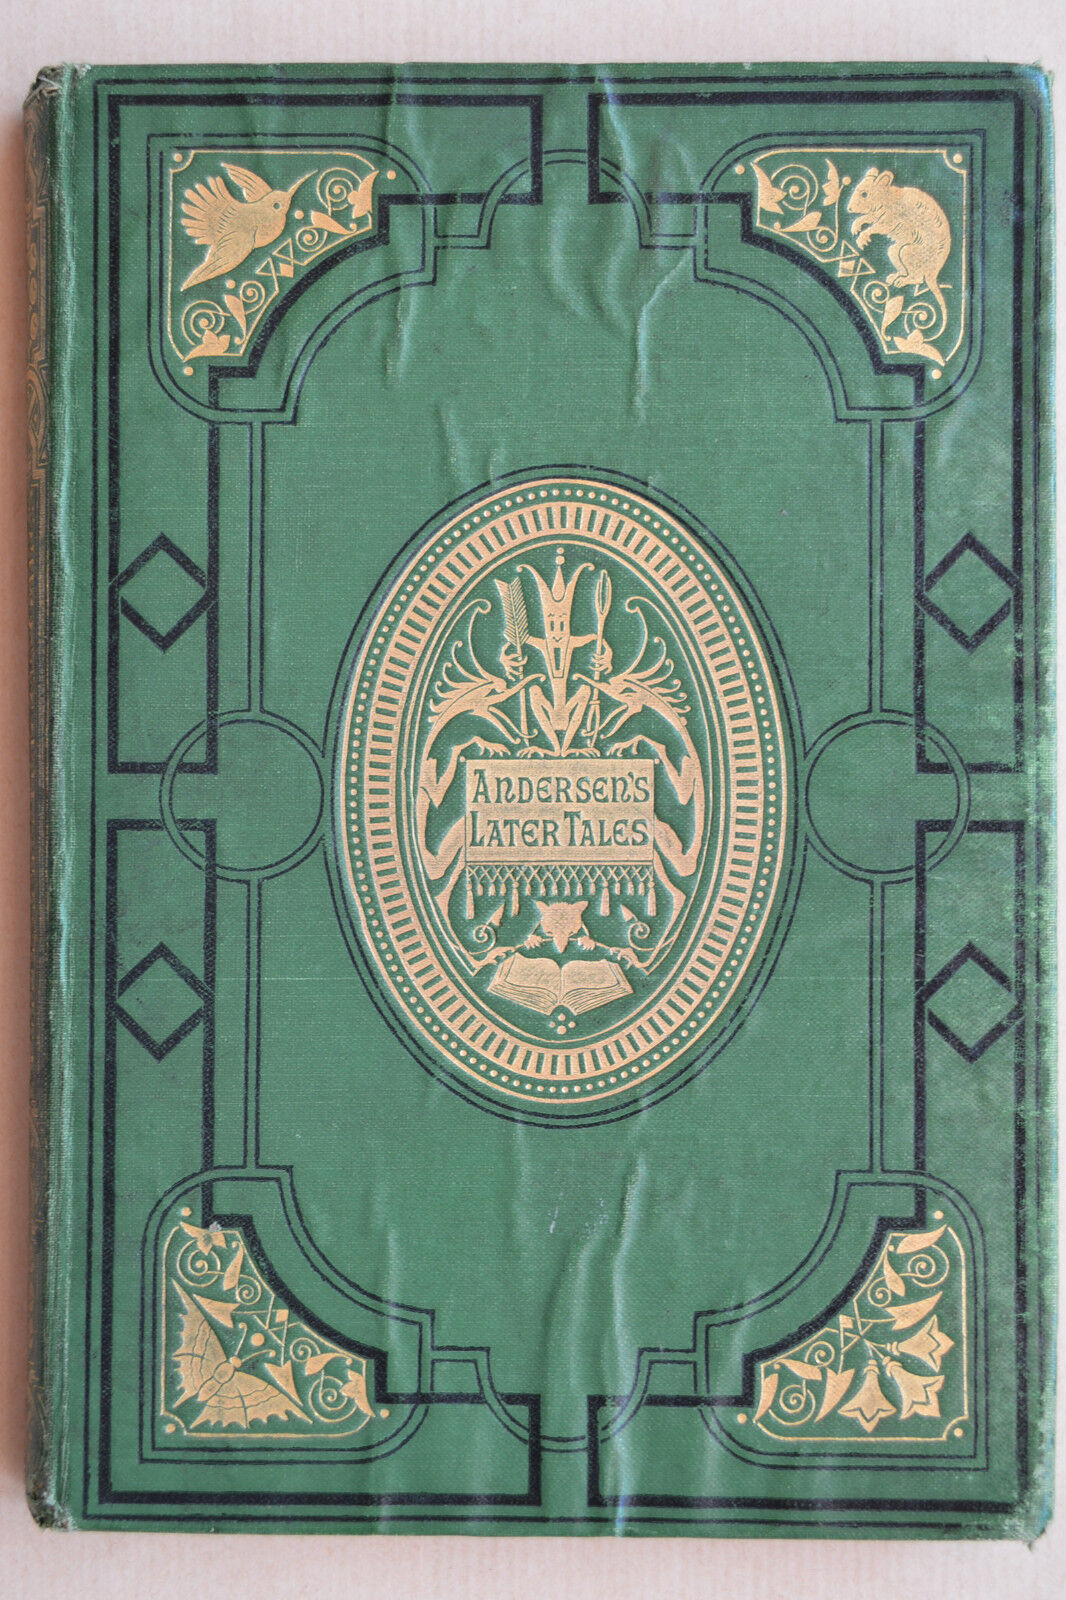 1869 Hans Christian Andersen's LATER TALES Antique Green Victorian Cover Book